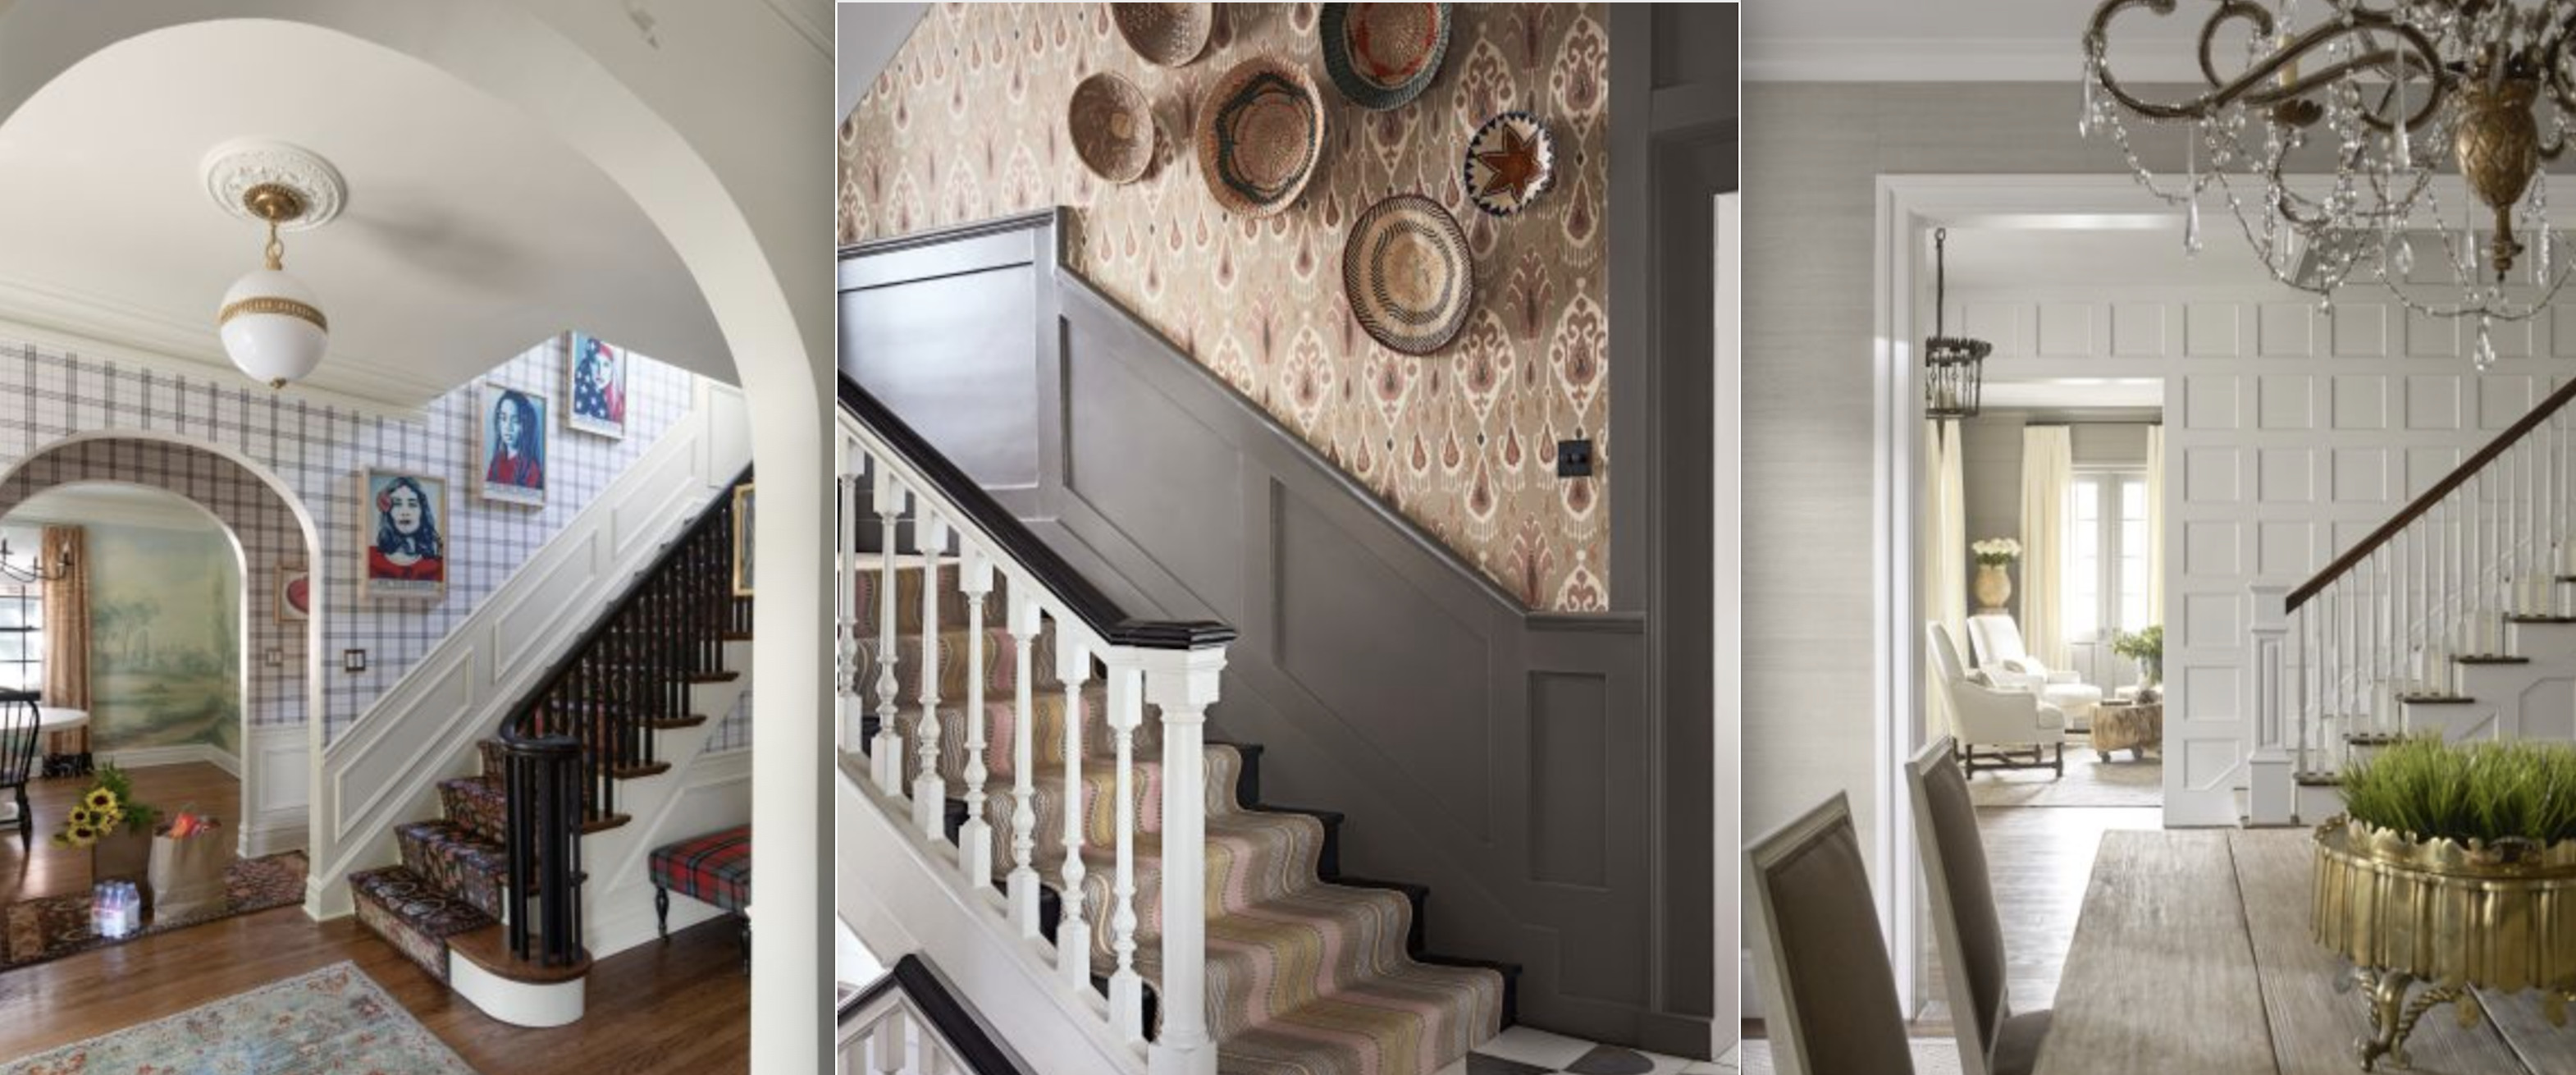 Staircase Wall Ideas: 10 Ways To Dress Stair Walls Beautifully |